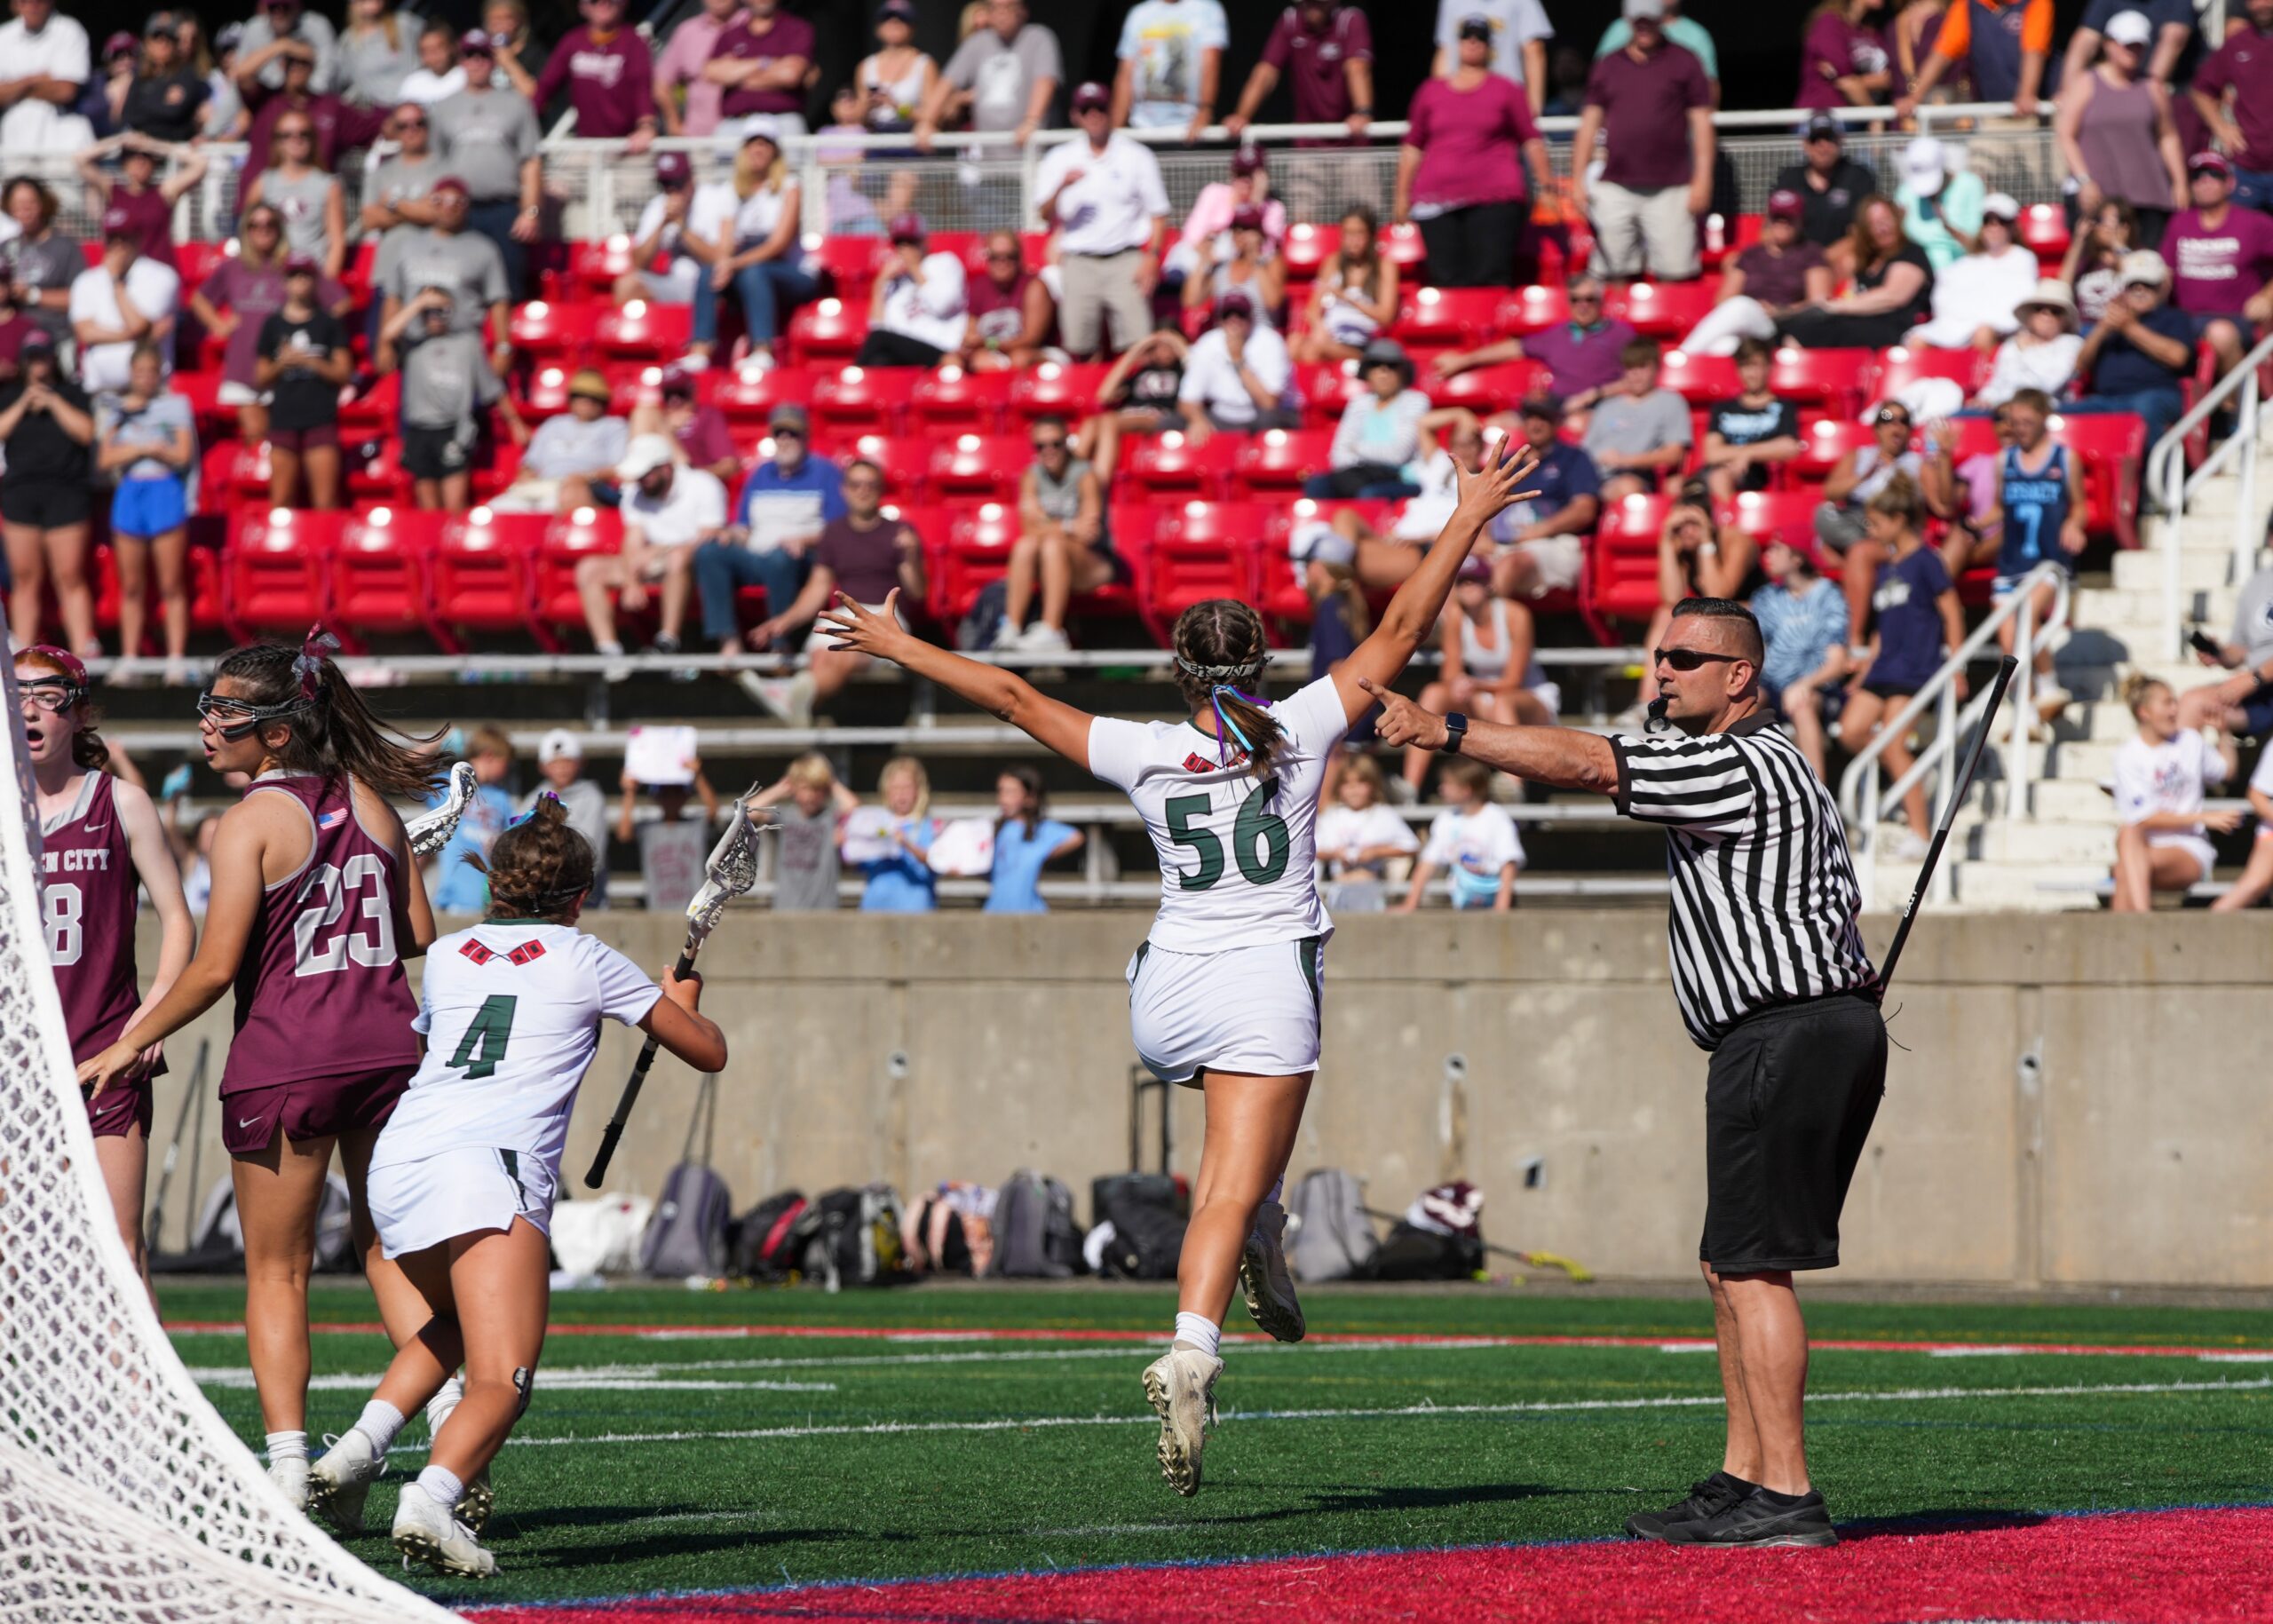 Westhampton Beach girls lacrosse player Isabella Blanco scored the game-winner goal in her team's Long Island Championship game, in front of fans at Stony Brook University. Before Title IX, sports seasons for girls teams only included four or five games, and no playoff system. RON ESPOSITO